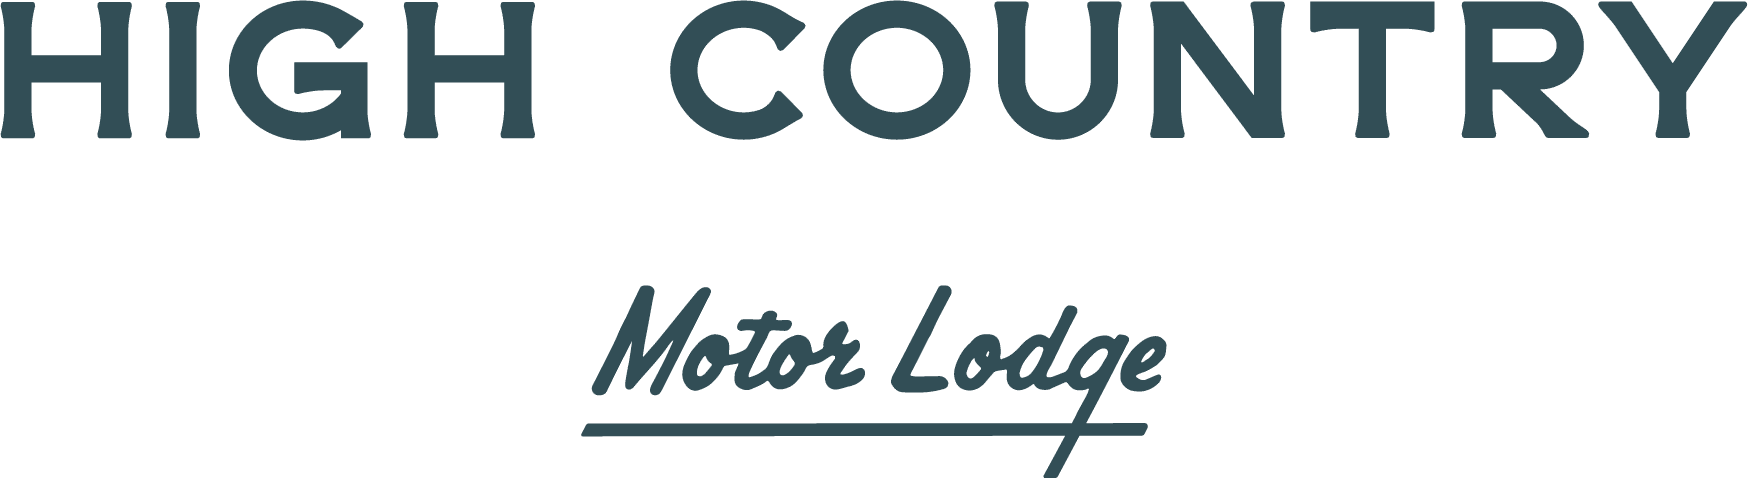 High Country Motor Lodge | SDCO Partners